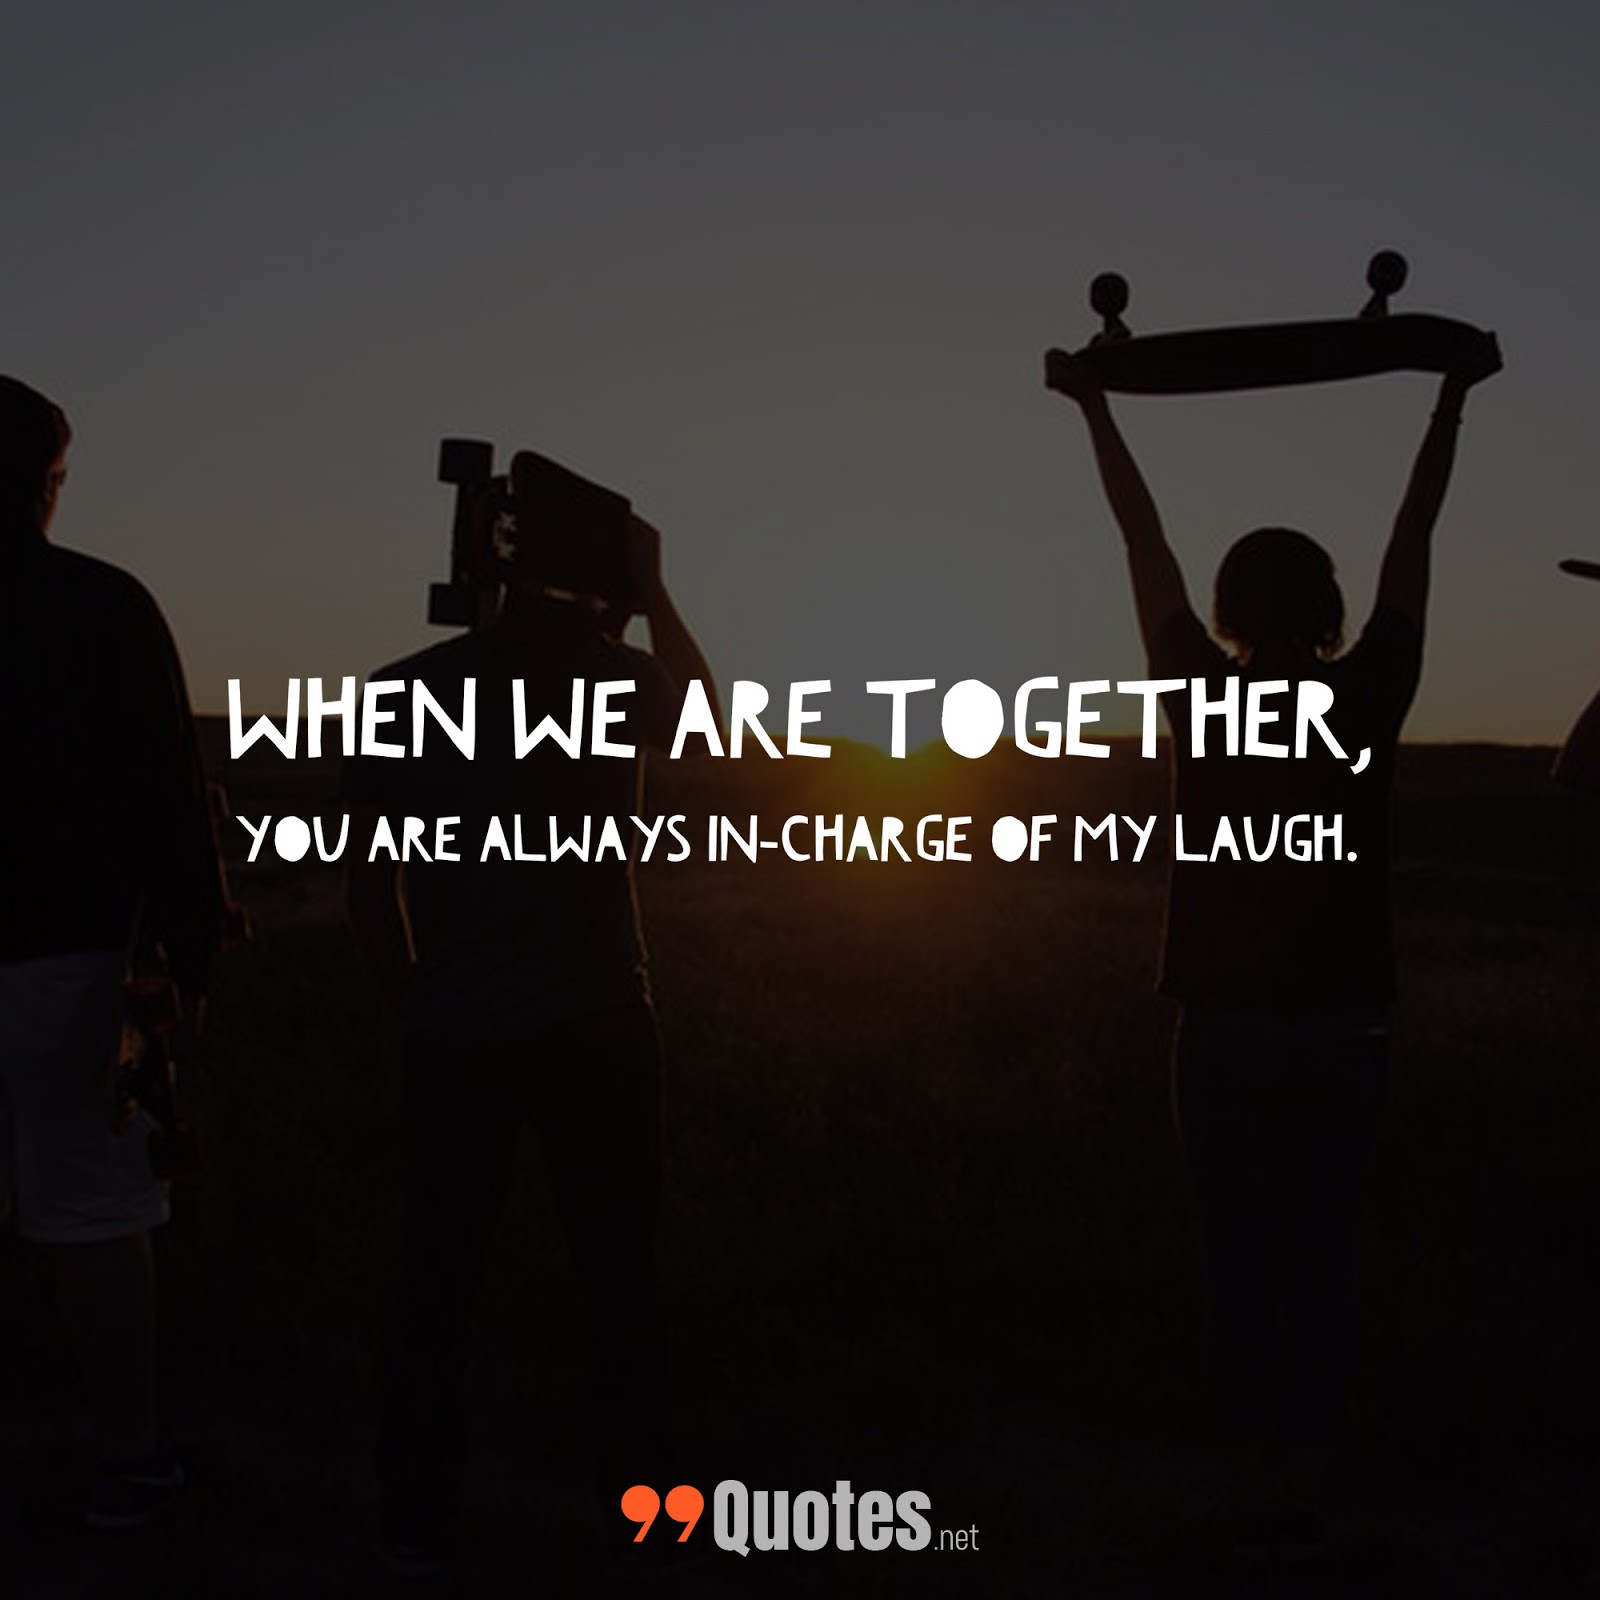 Friendship Quotes Short
 99 Cute Short Friendship Quotes You Will Love [with images]